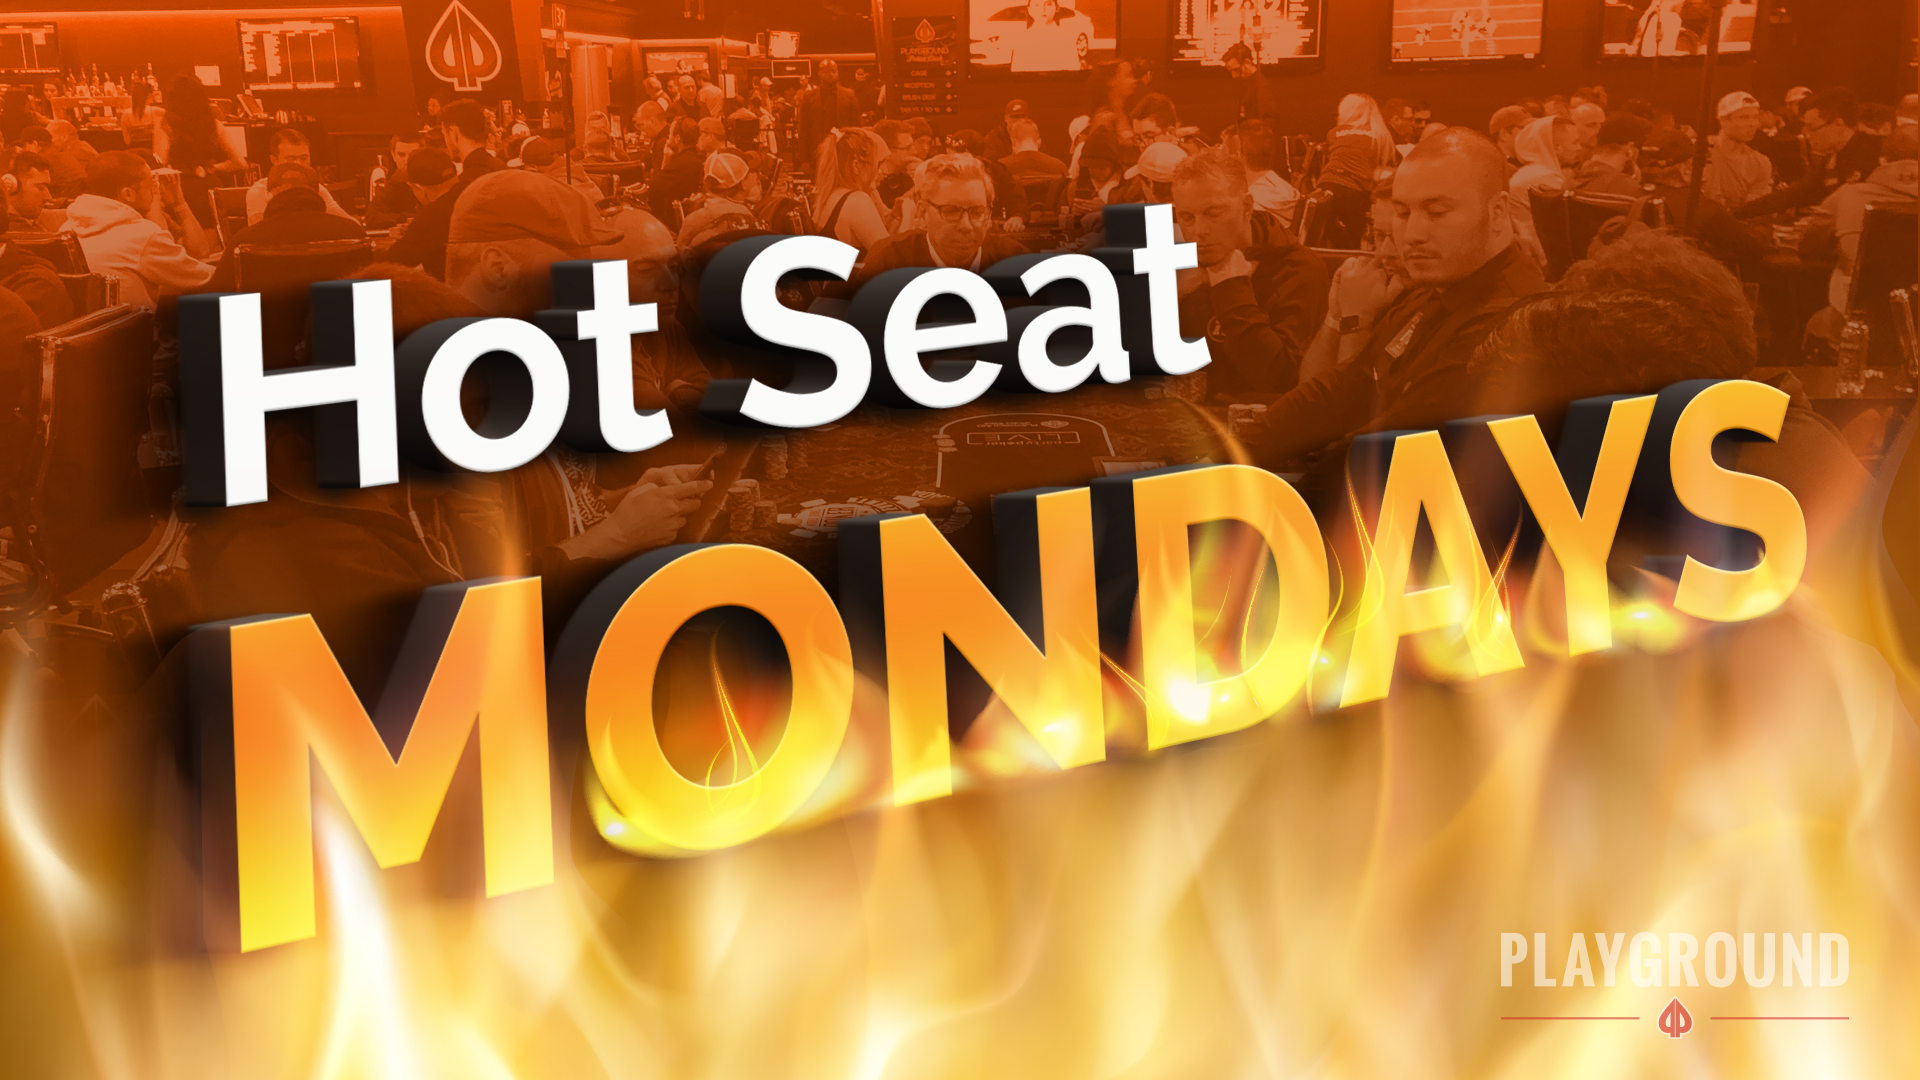 The new promos have arrived… meet Hot Seat Mondays!